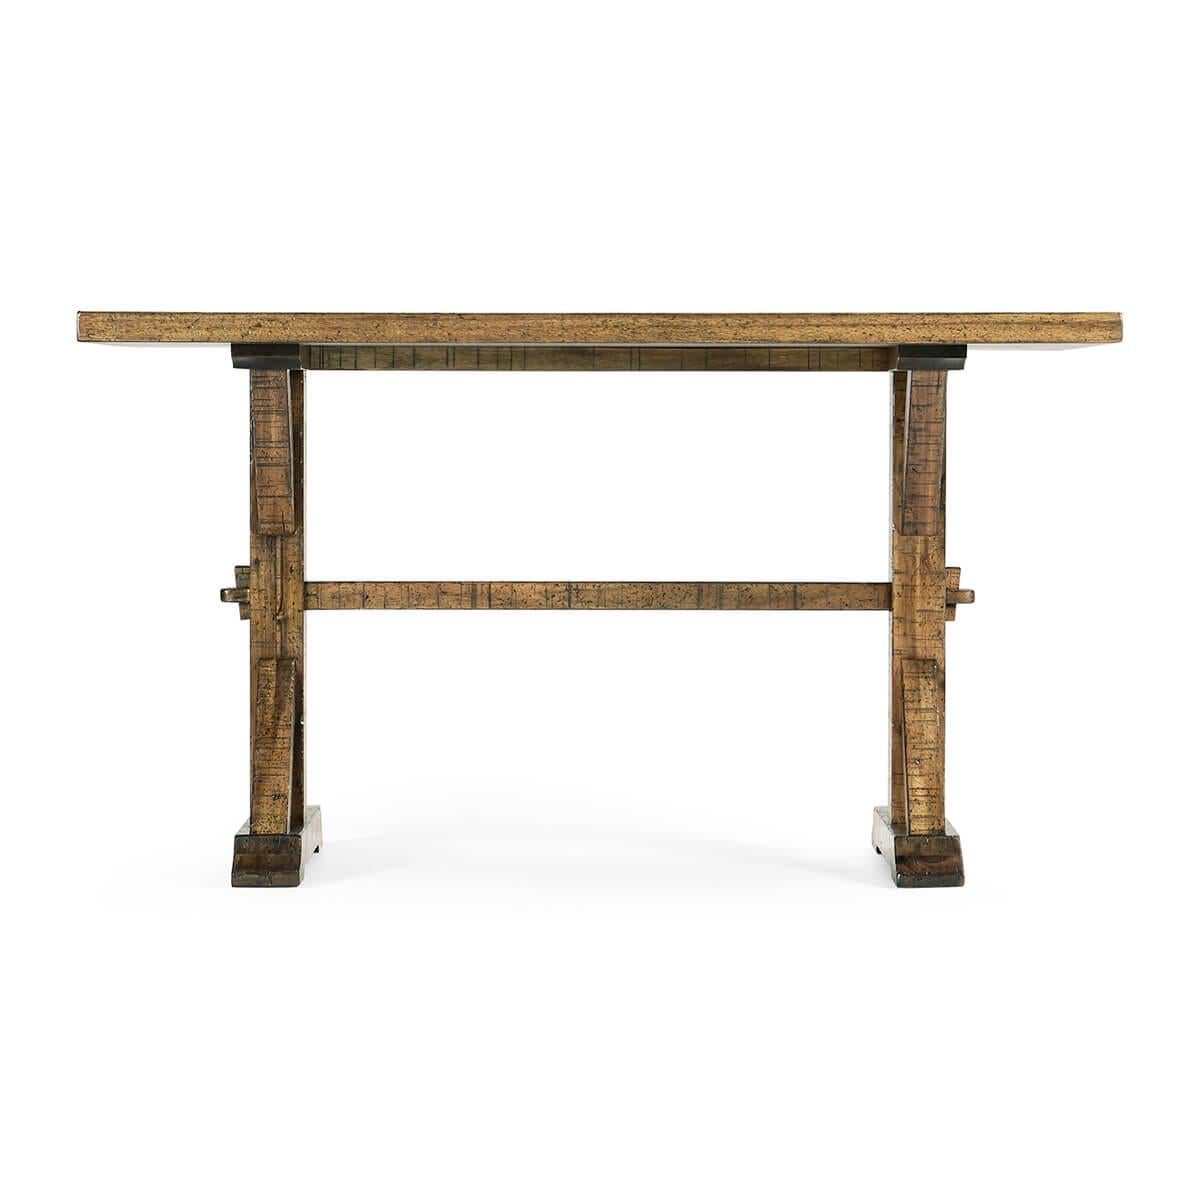 Rustic country dining table with a solid distressed top, the medium driftwood rustic finish shows exposed saw marks and the trestle end base with mortice and tenon joints to the stretcher and supports.

Dimensions: 54